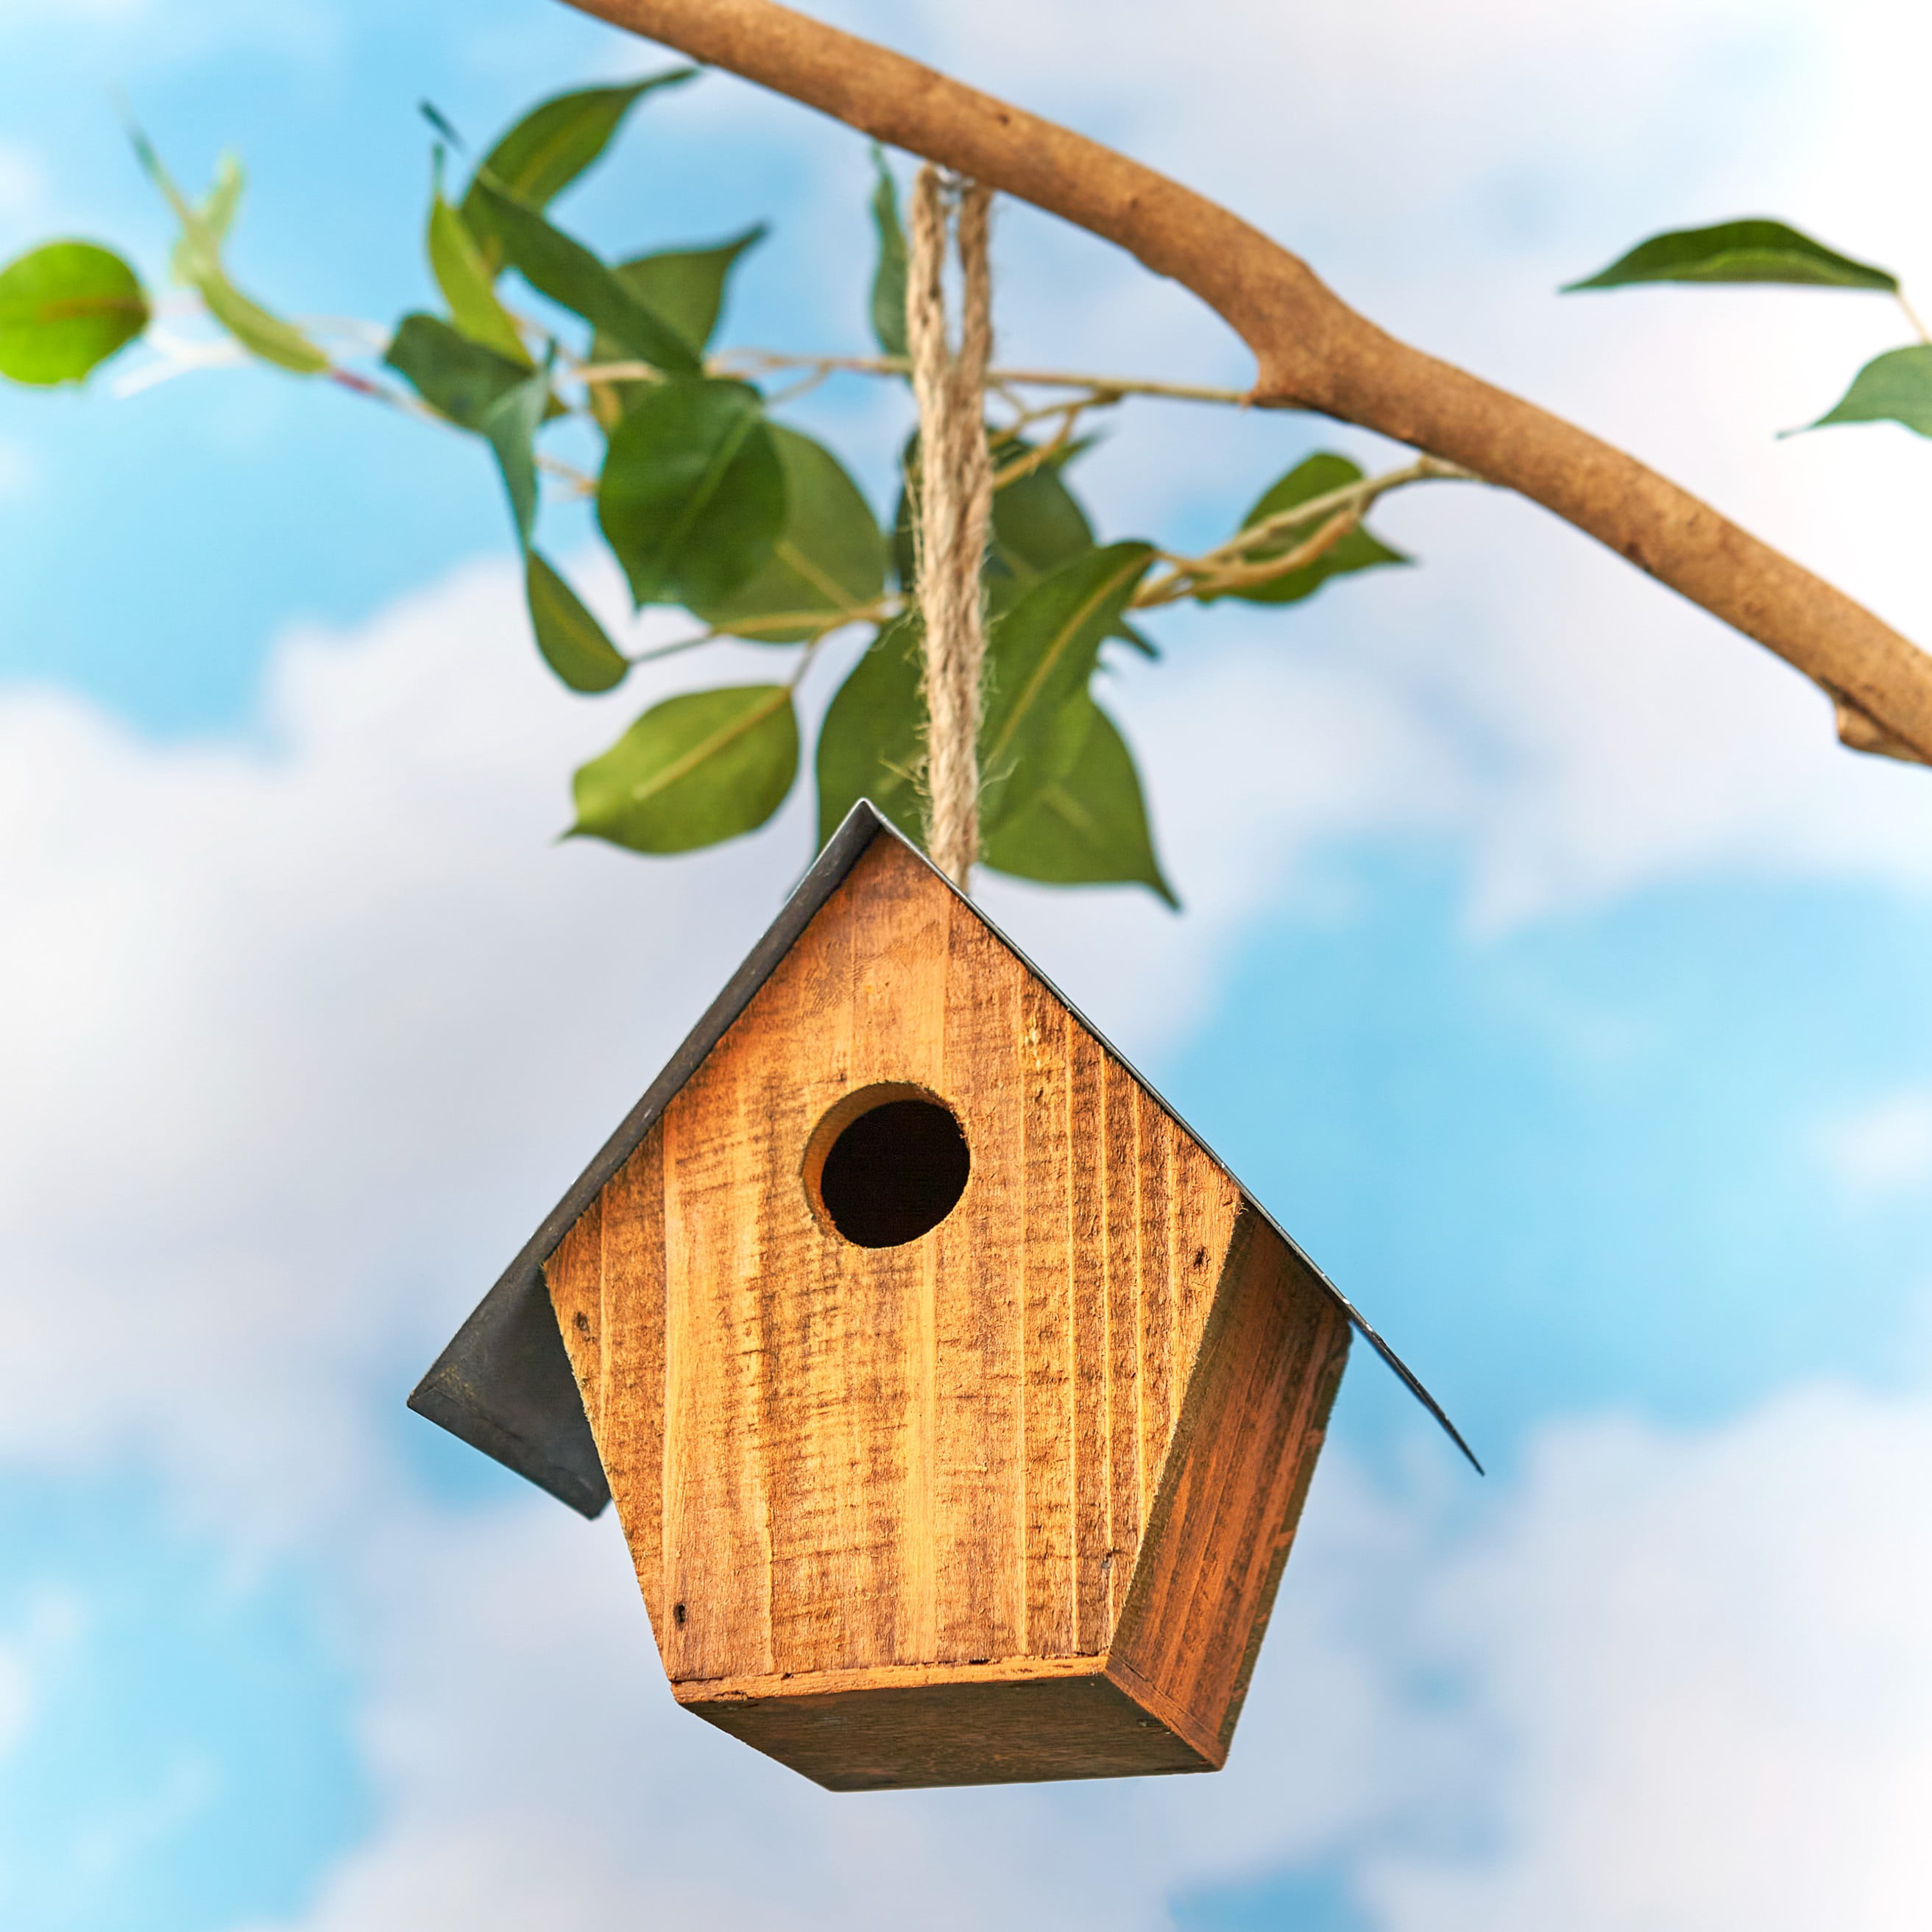 Details about   Cute Bird House Eco Wooden Houses For Birds Decorative Wild Birdhouses Hanging 